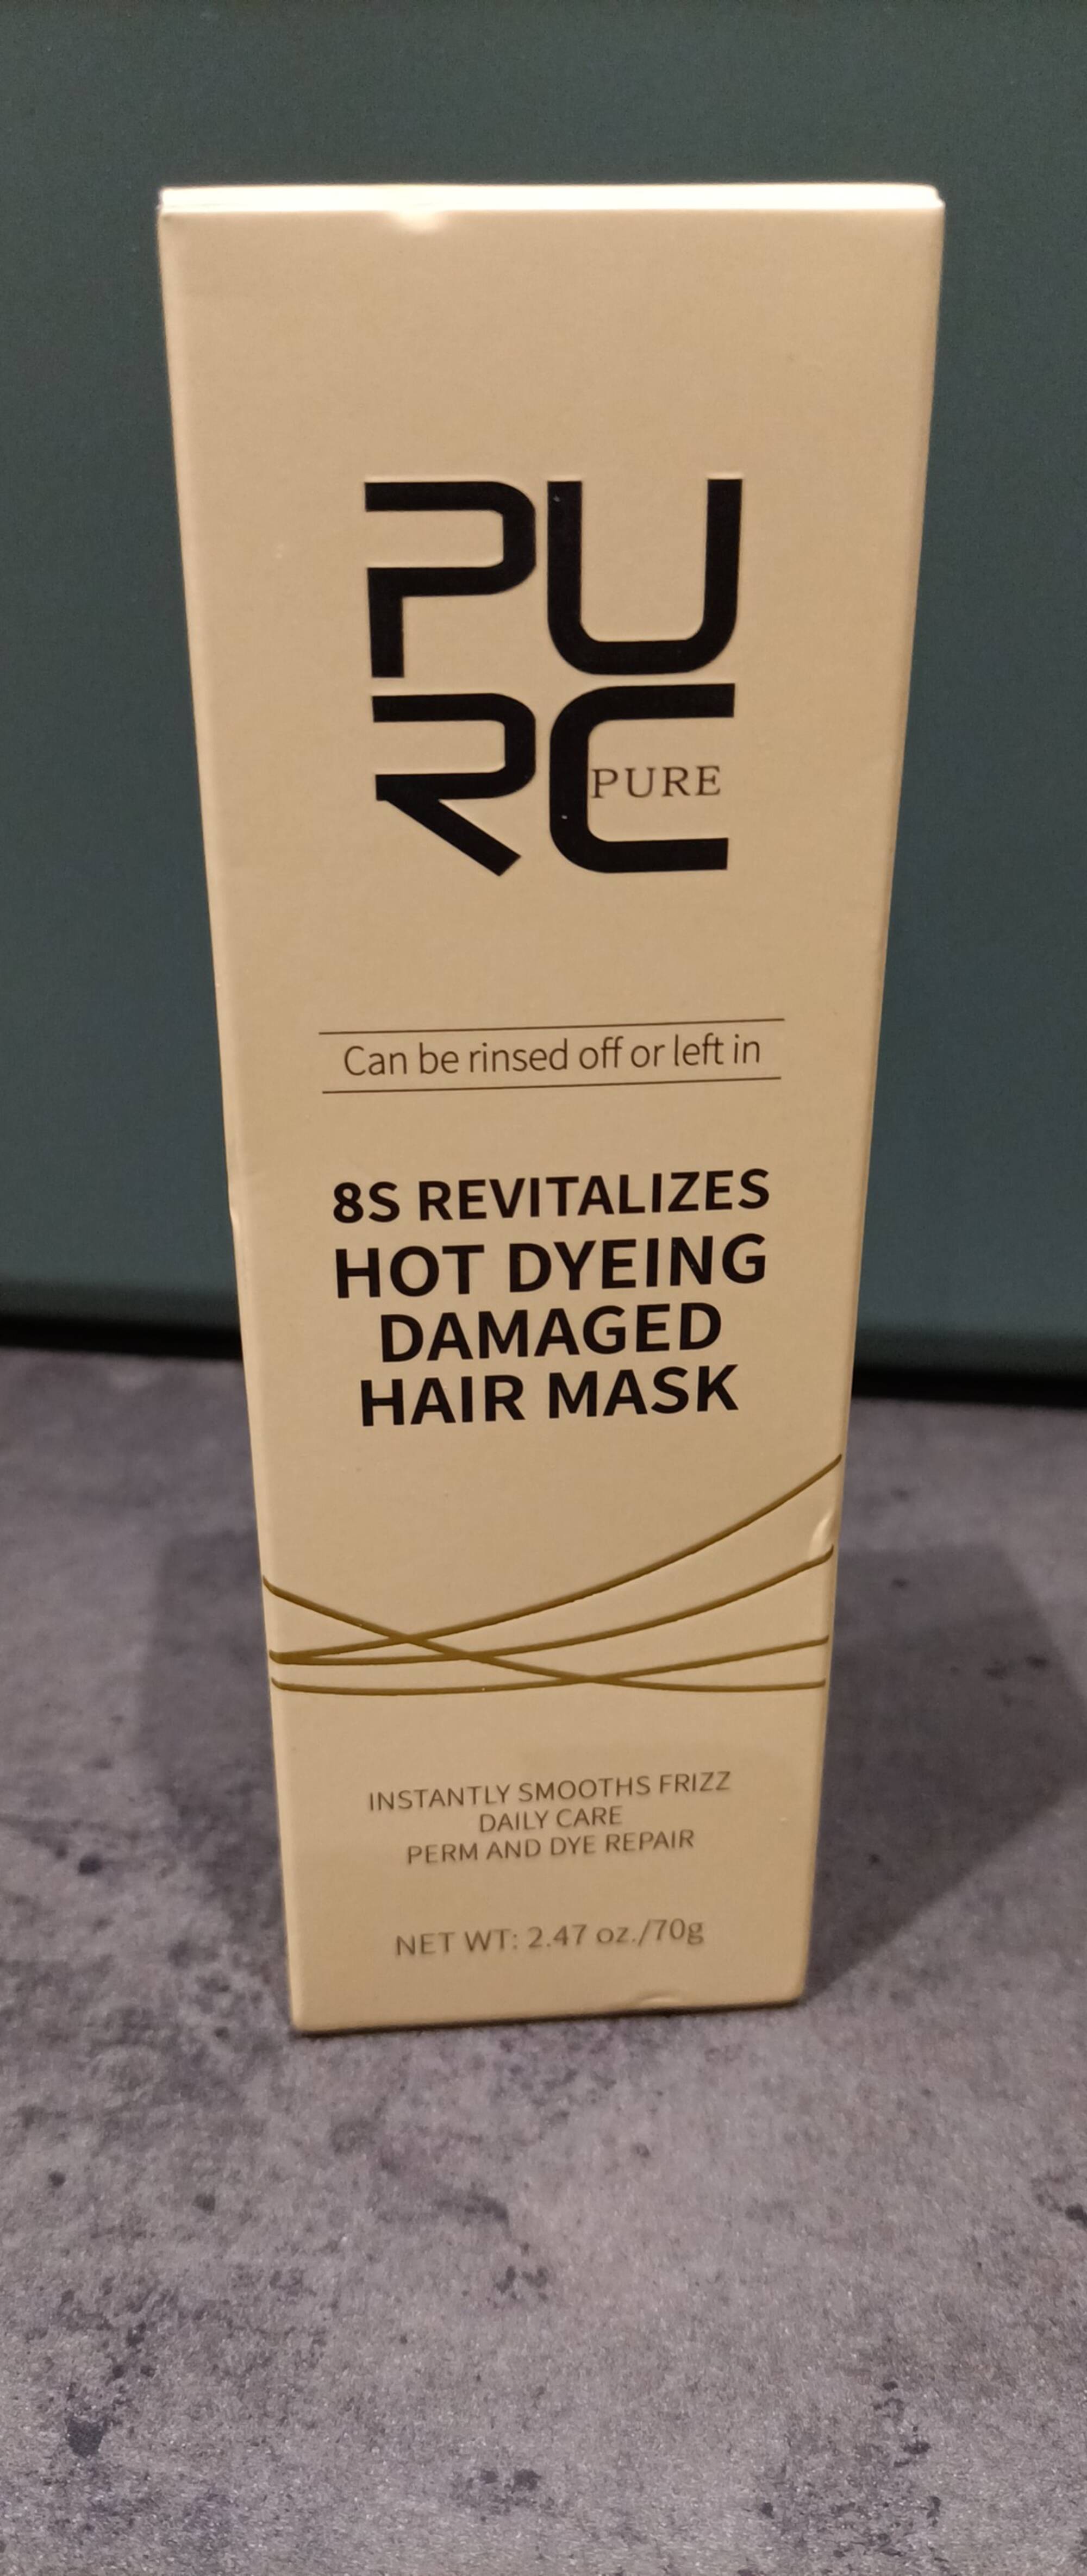 PURE - Hot dyeing damaged hair mask